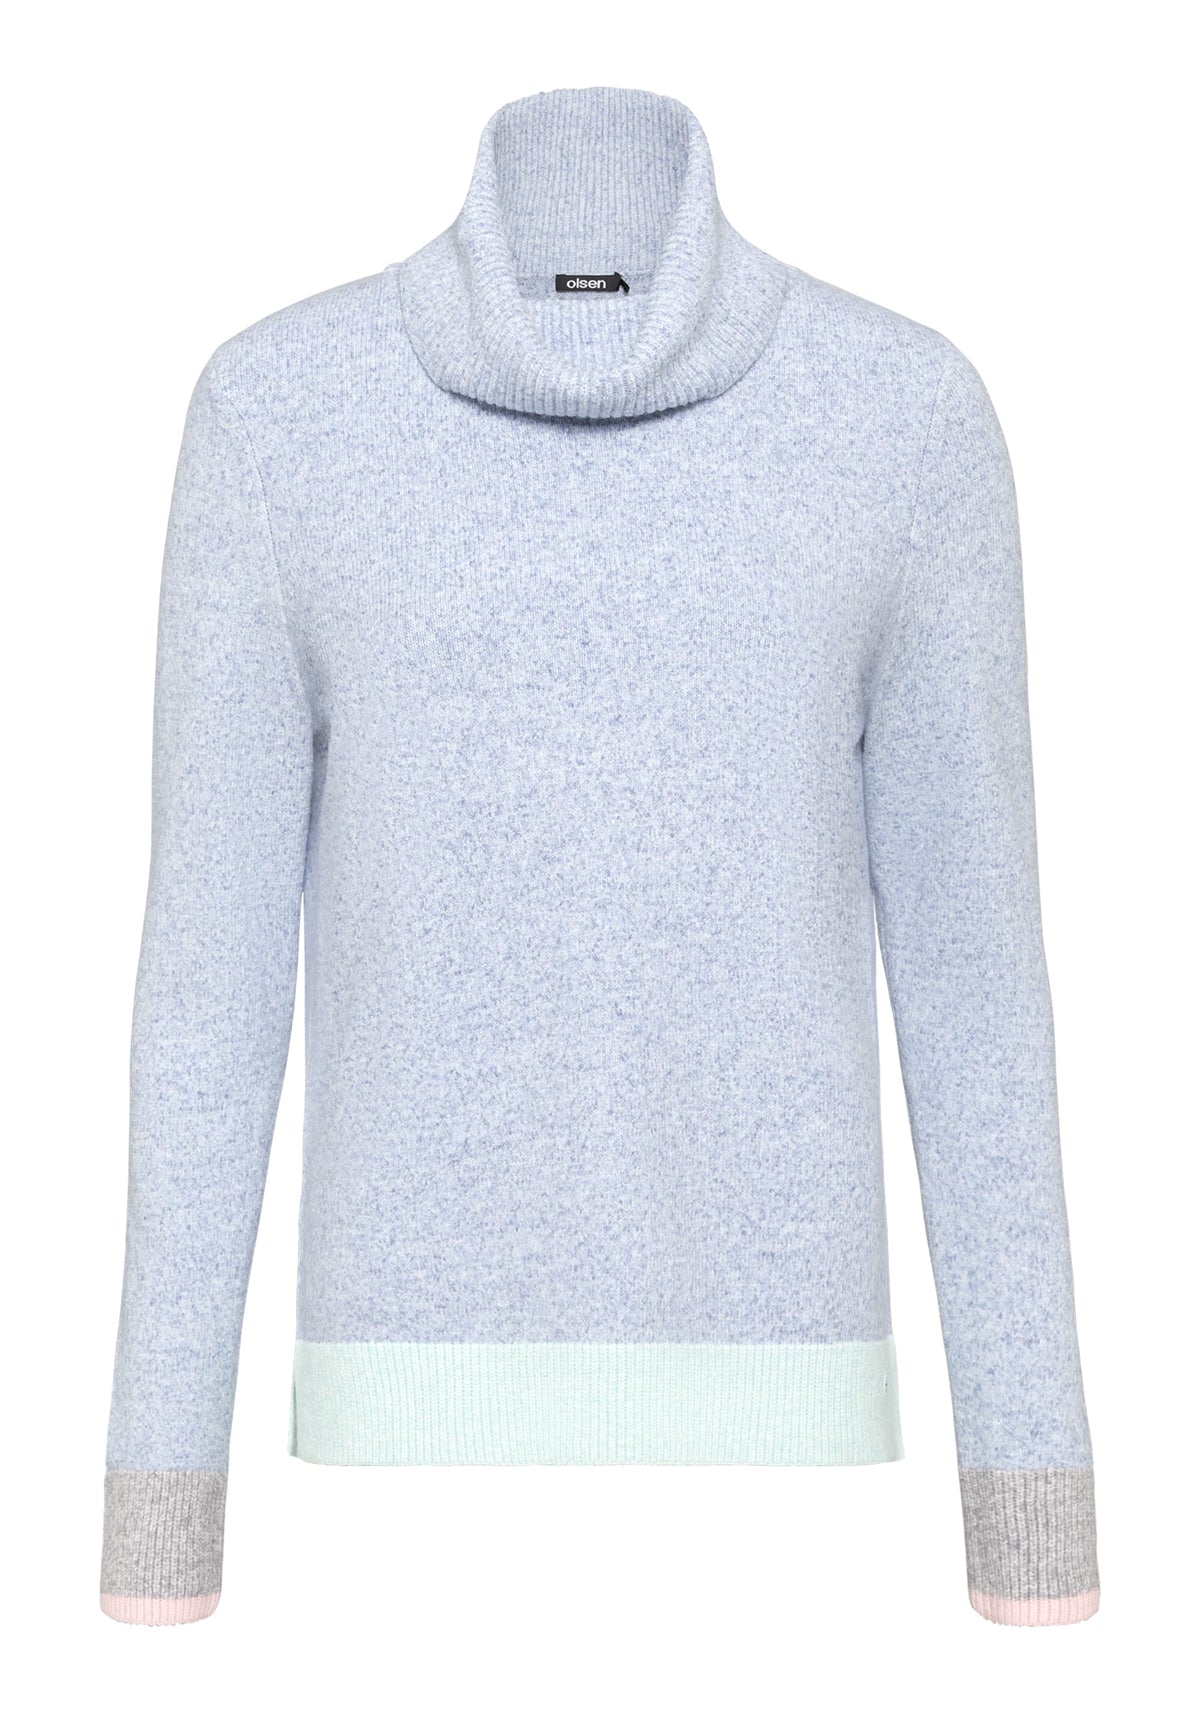 Long Sleeve Marled Yarn Funnel Neck Pullover